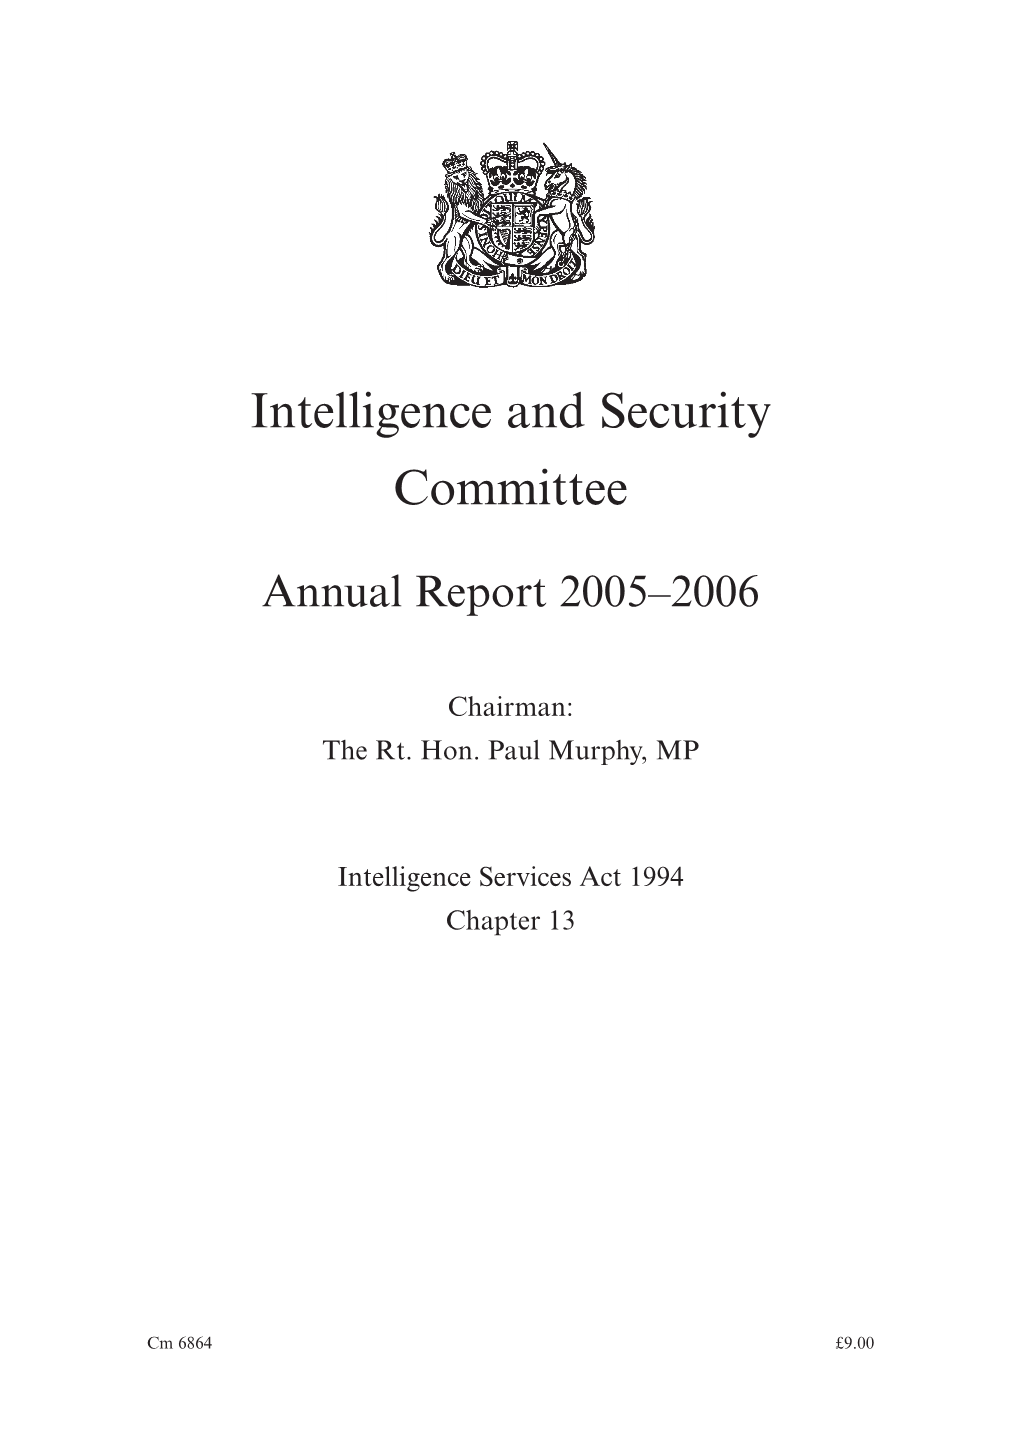 ISC Annual Report 2005-2006